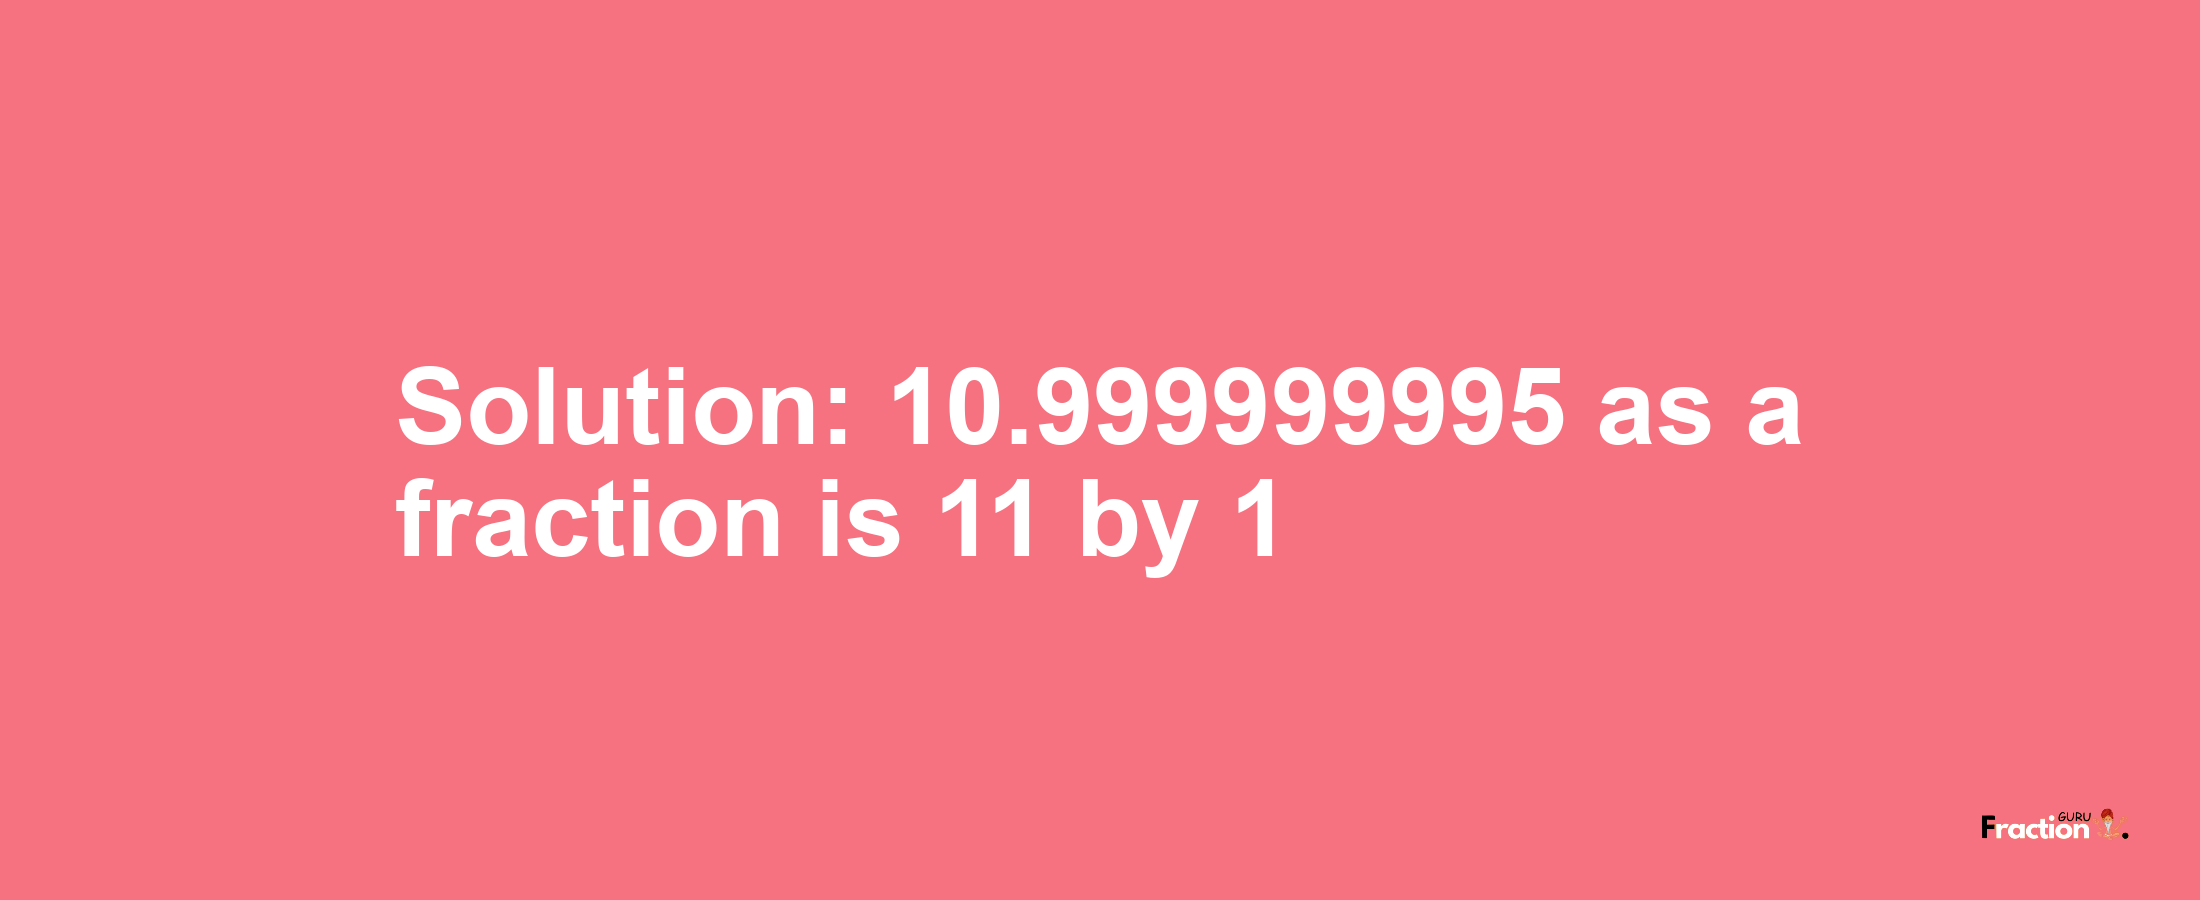 Solution:10.999999995 as a fraction is 11/1